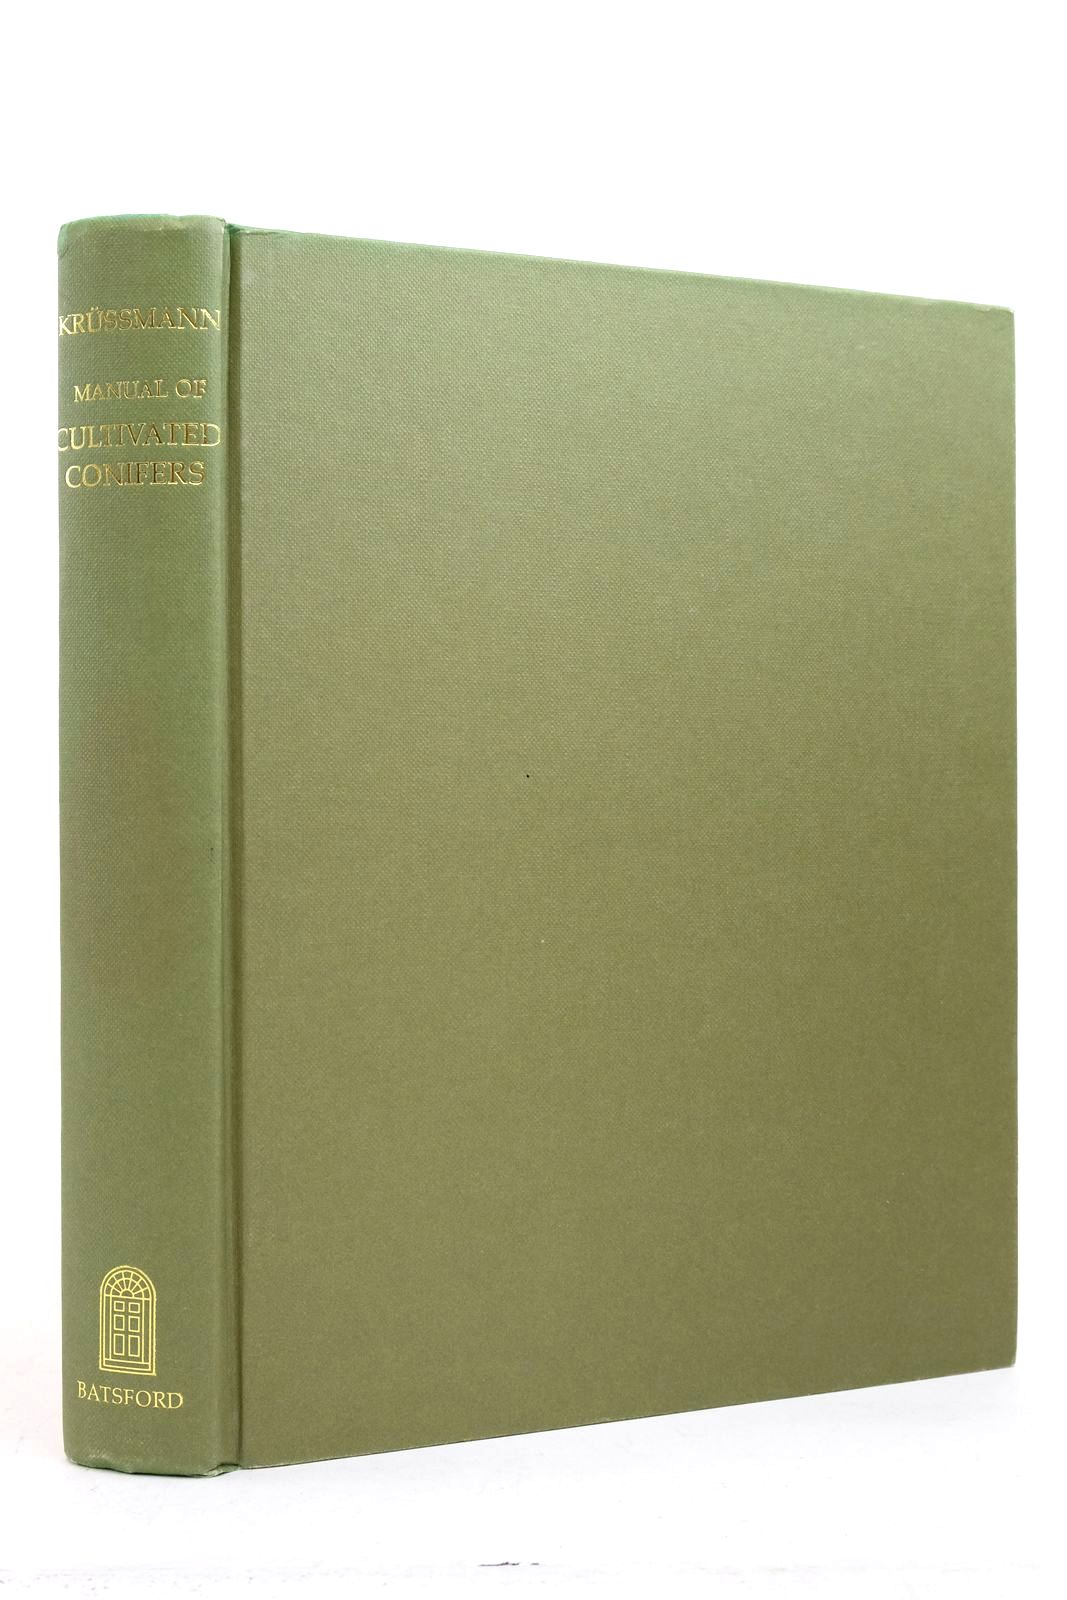 Photo of MANUAL OF CULTIVATED CONIFERS written by Krussmann, Gerd et al, published by B.T. Batsford Ltd. (STOCK CODE: 2139687)  for sale by Stella & Rose's Books